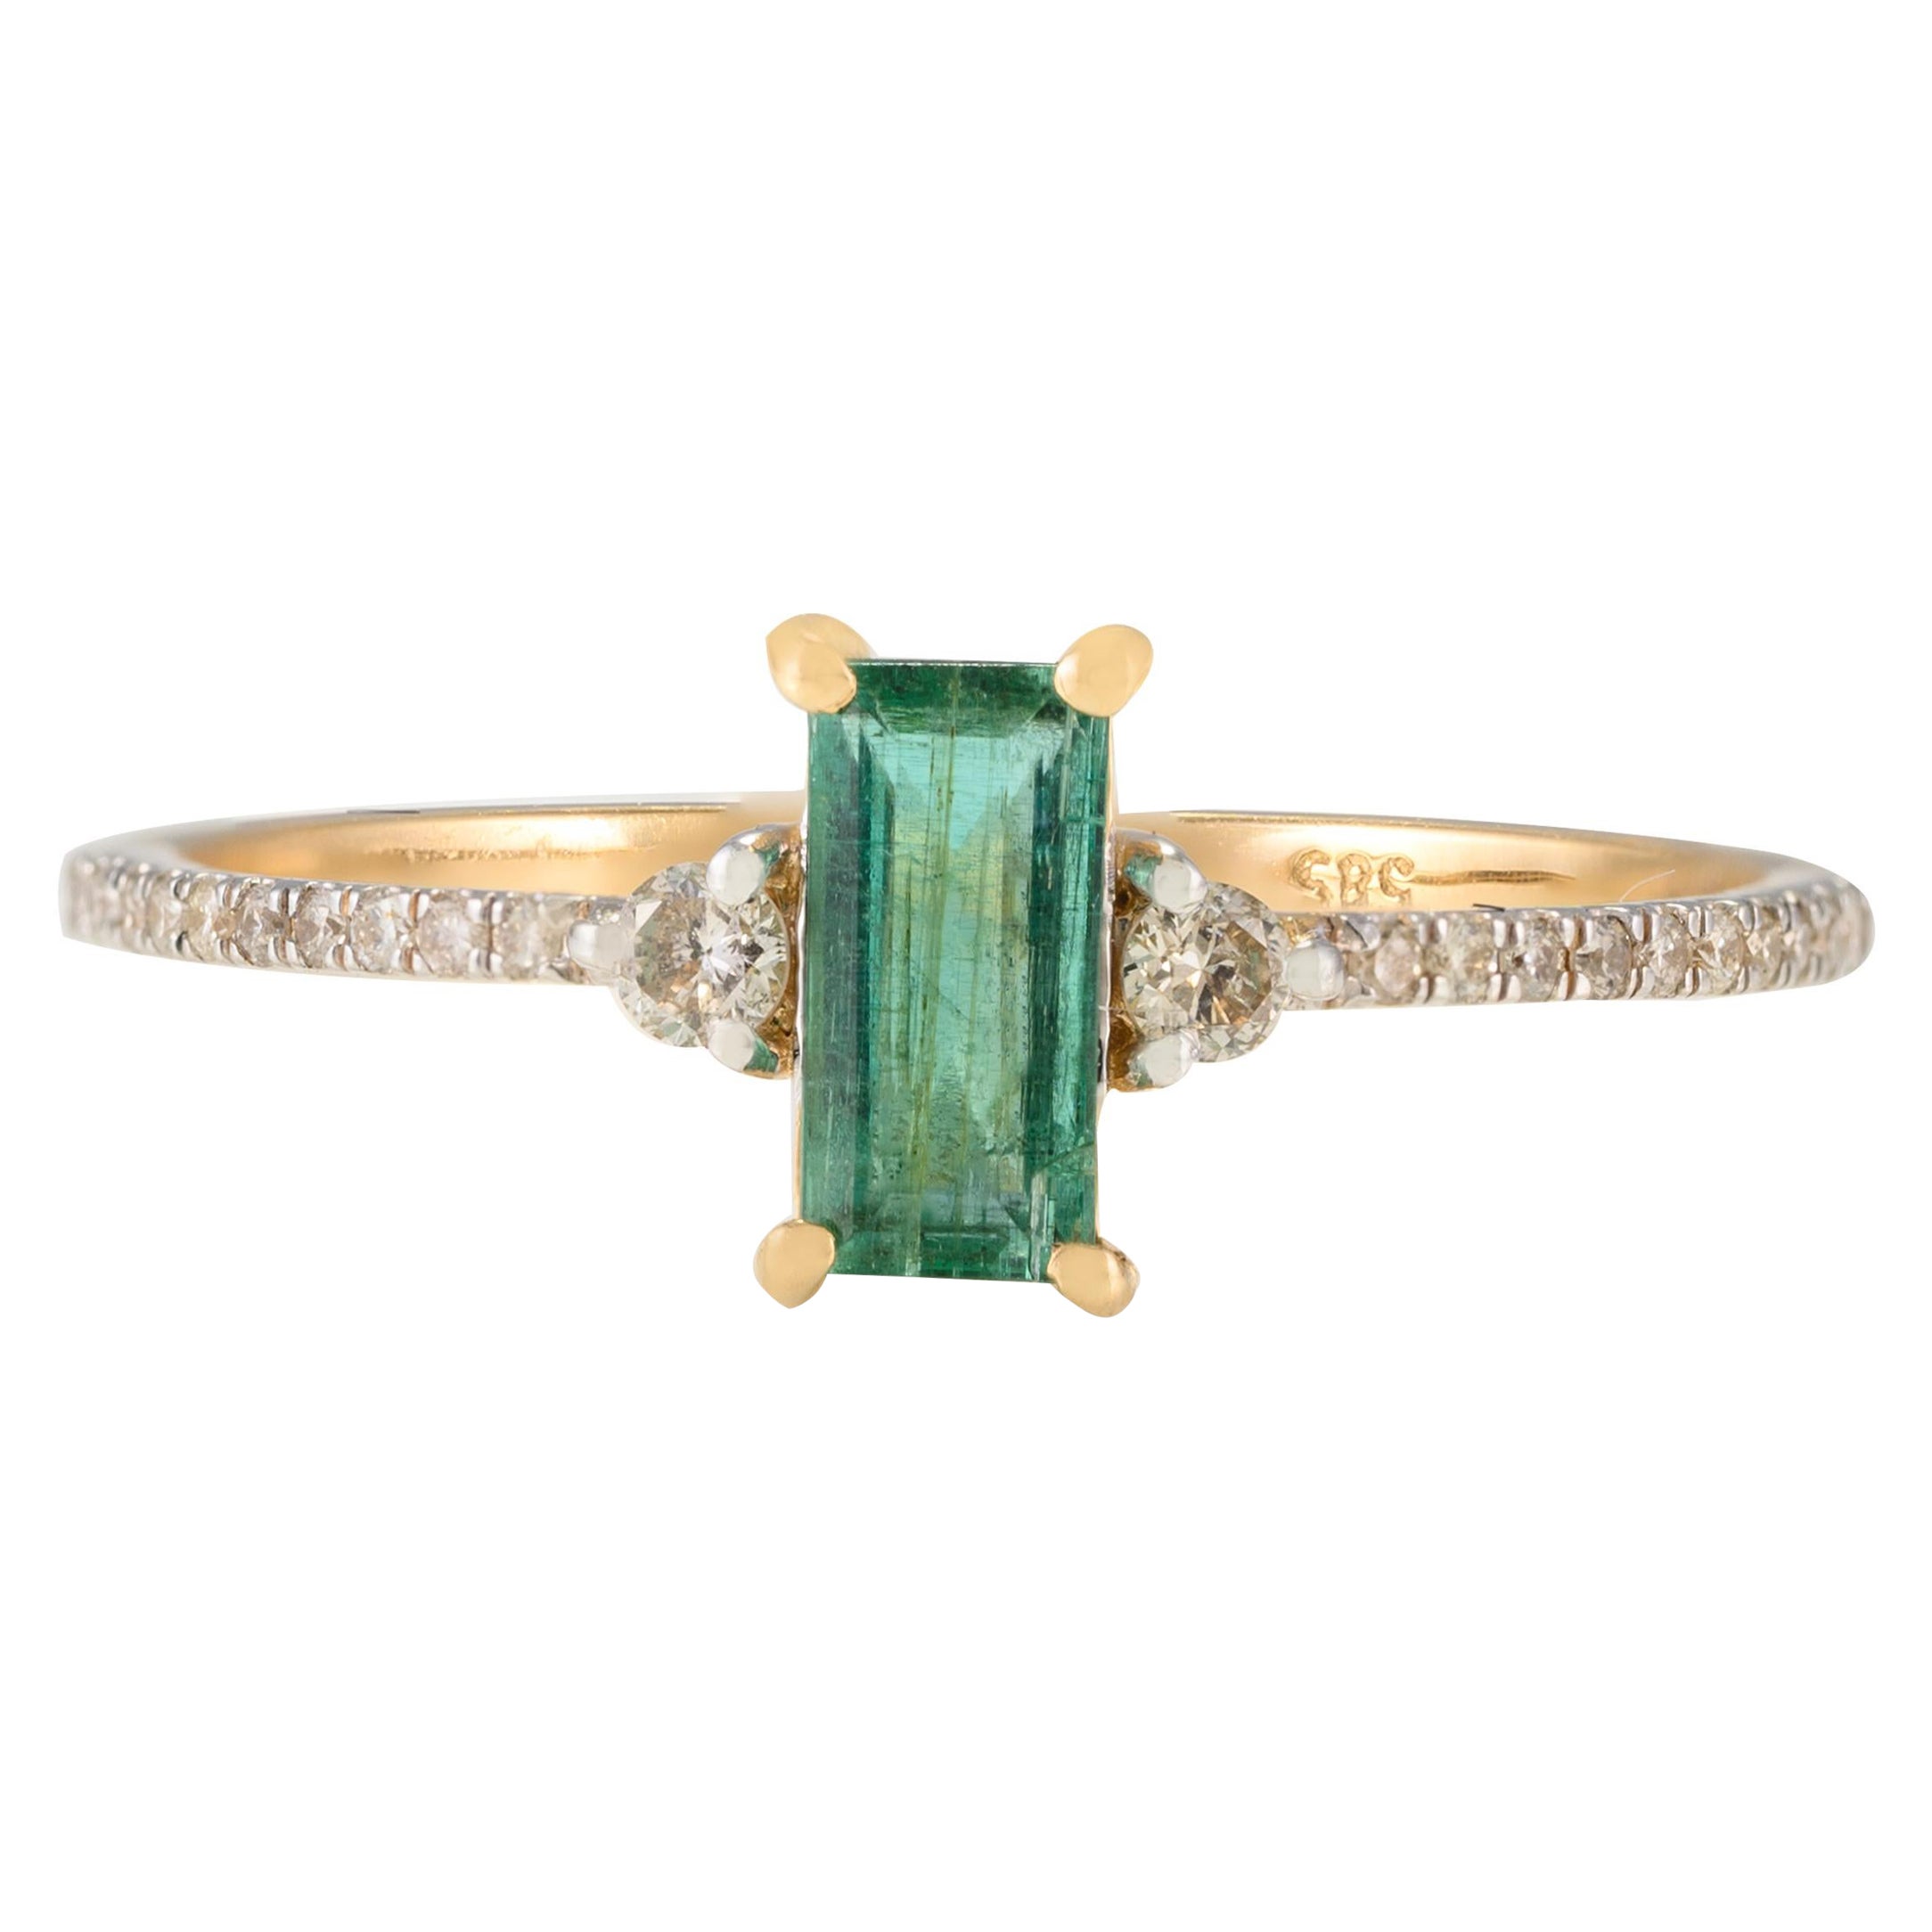 Minimalist Emerald Diamond Everyday Ring 14k Solid Yellow Gold Gift for Her